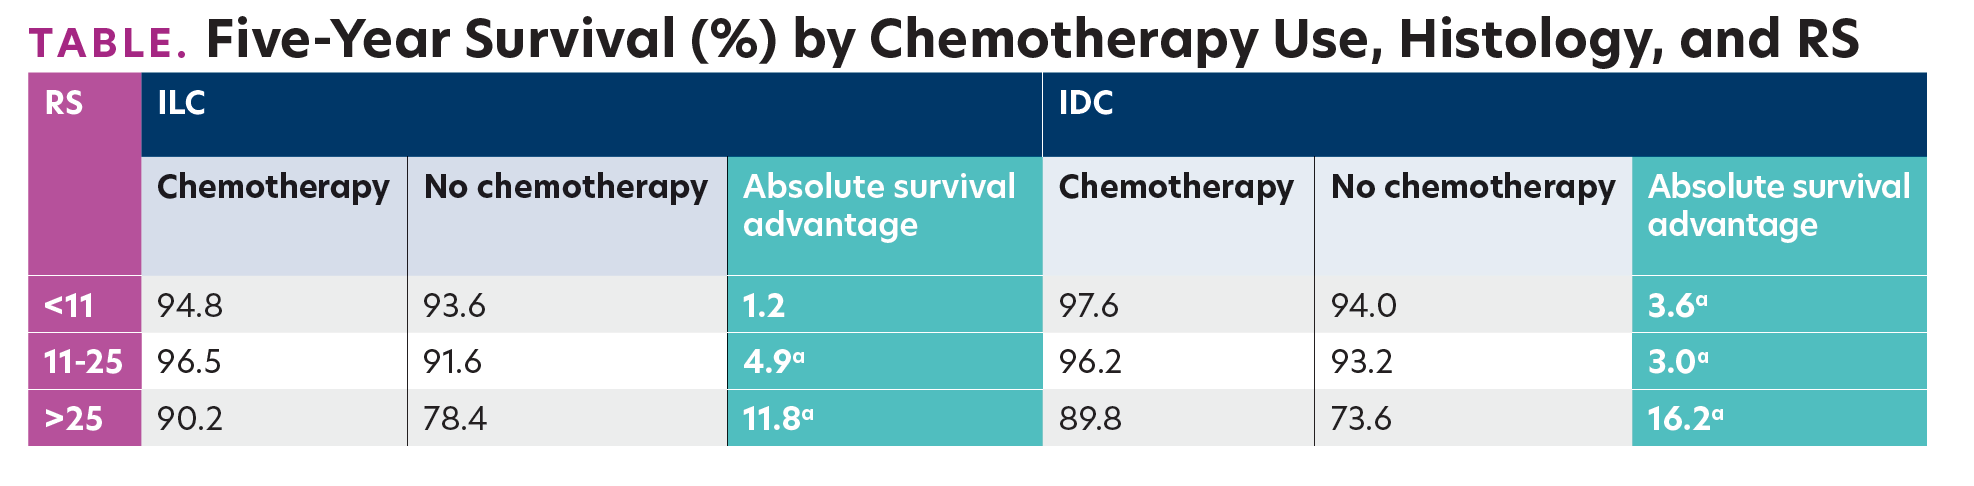 TABLE. Five-Year Survival (%) by Chemotherapy Use, Histology, and RS